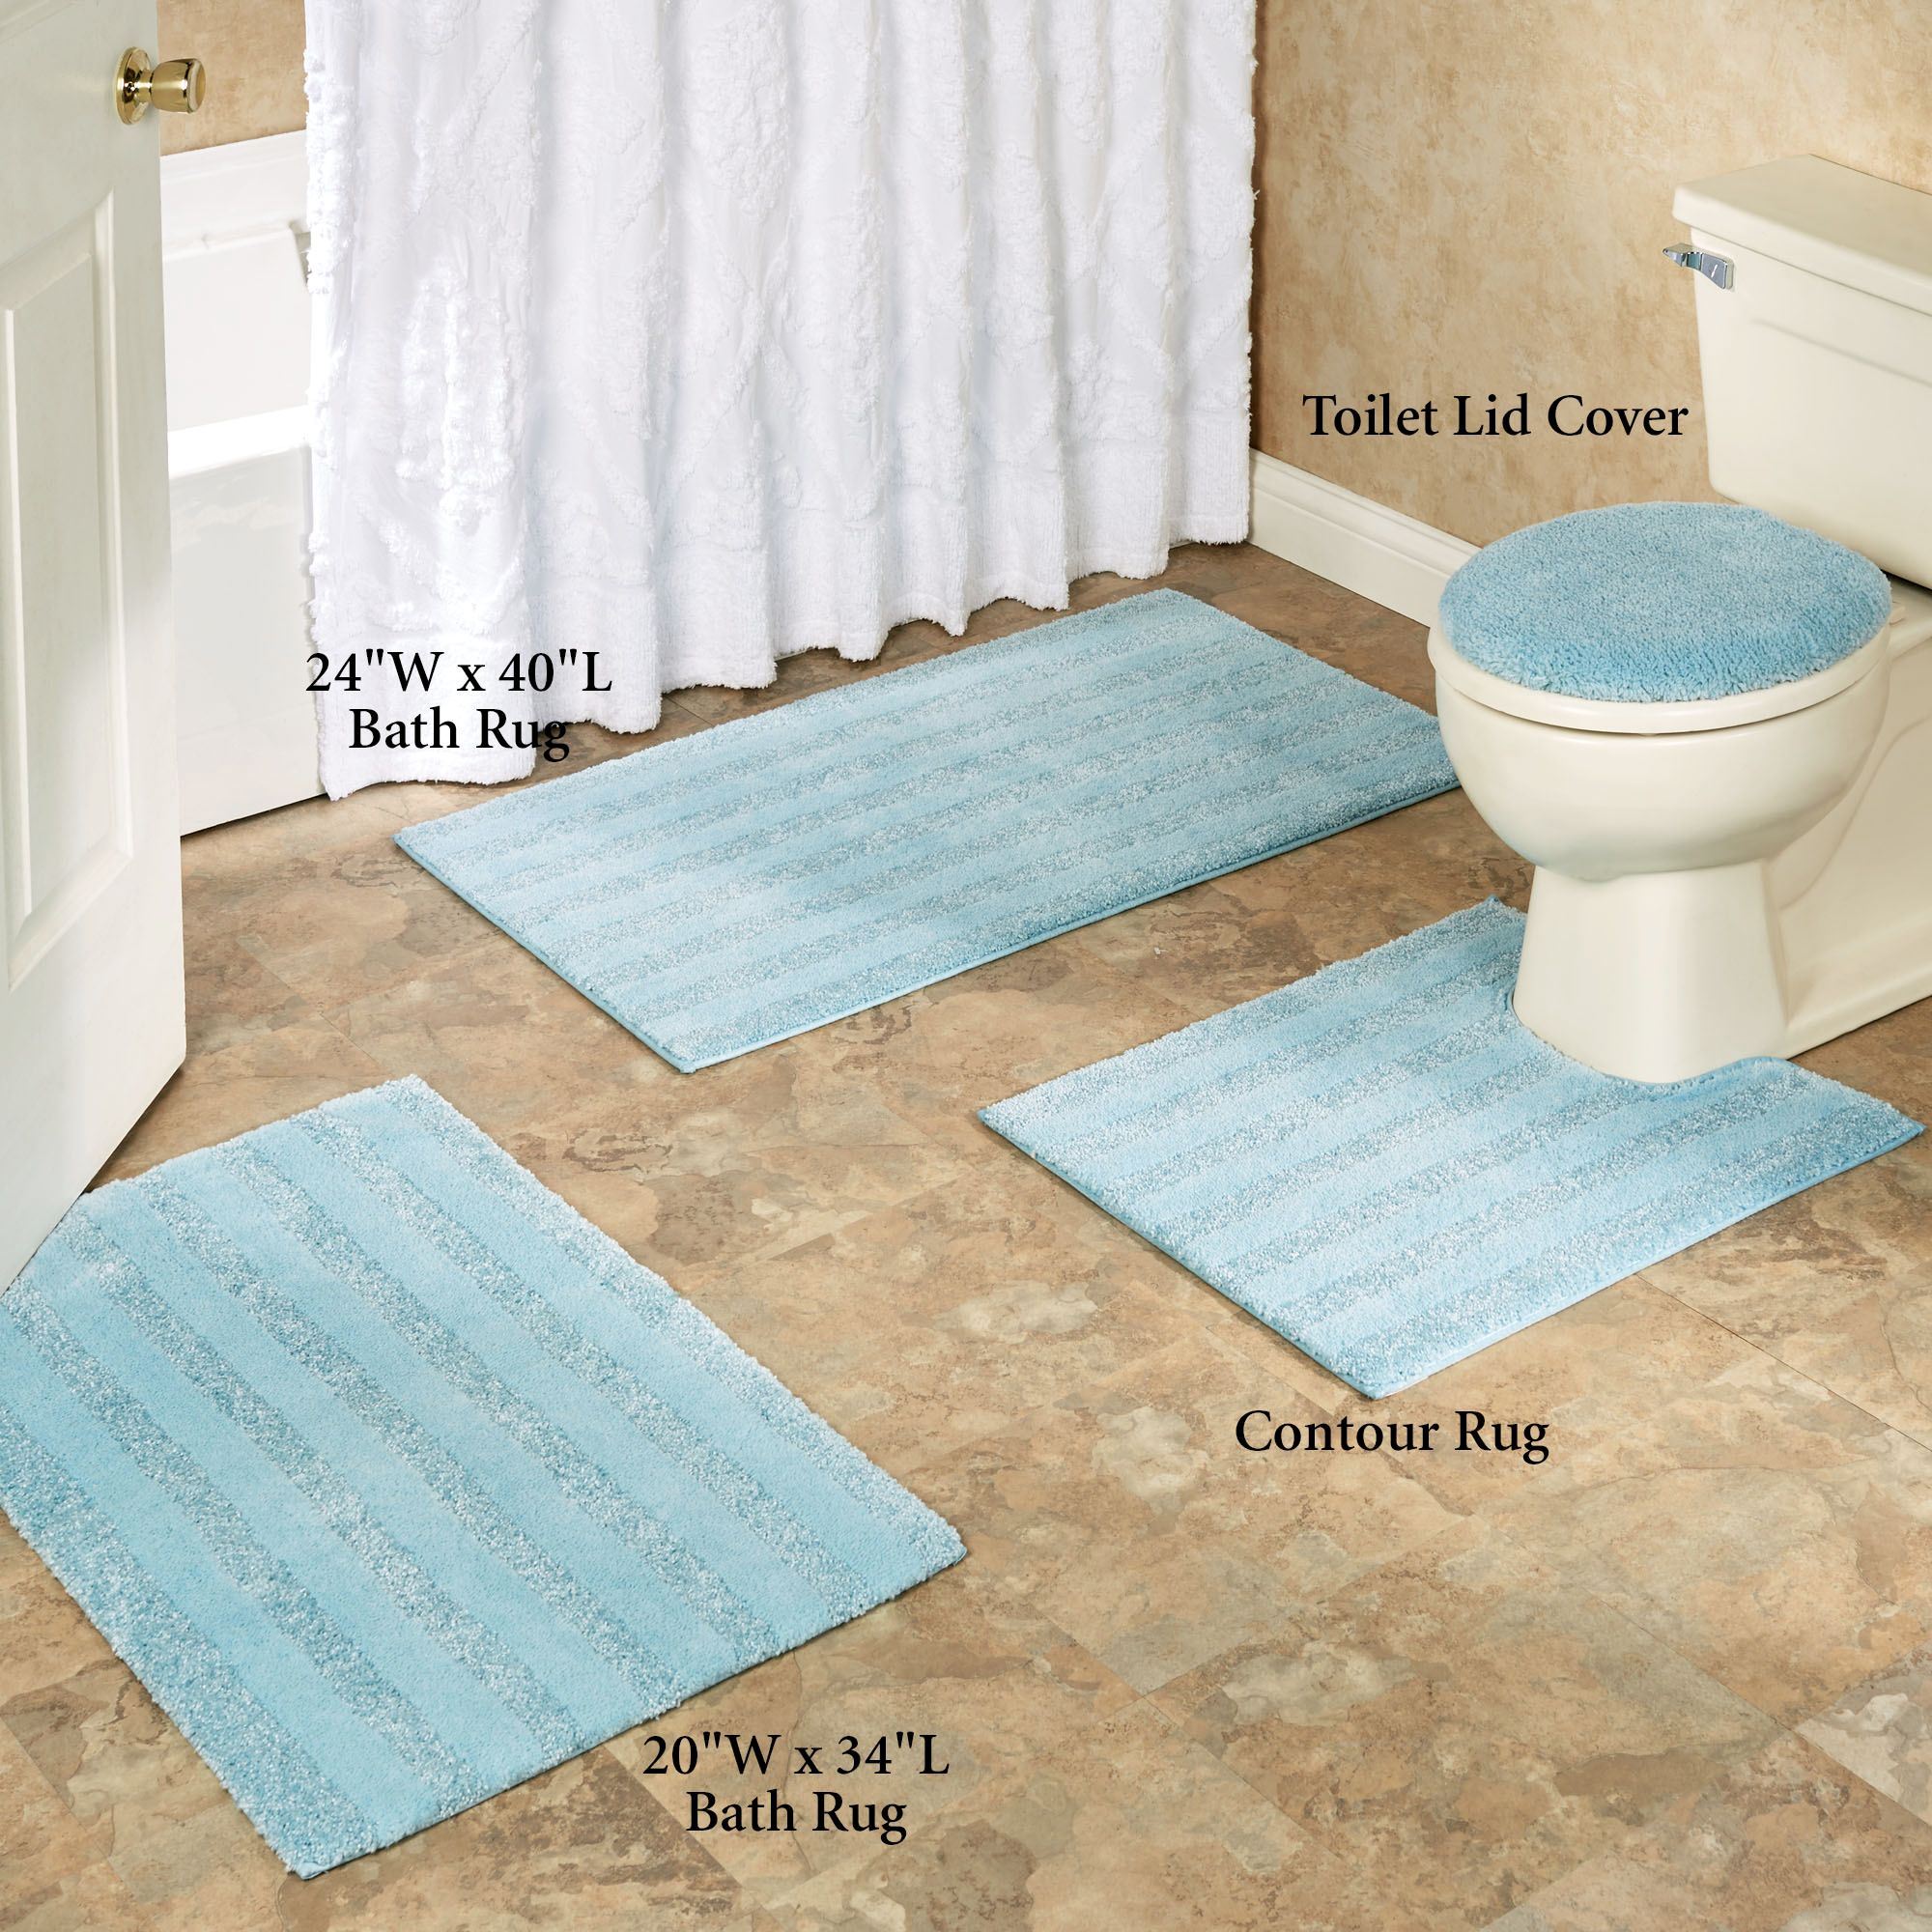 Bathroom rugs comfortable toilet seat covers or striped bathroom rugs.  QCLXINA